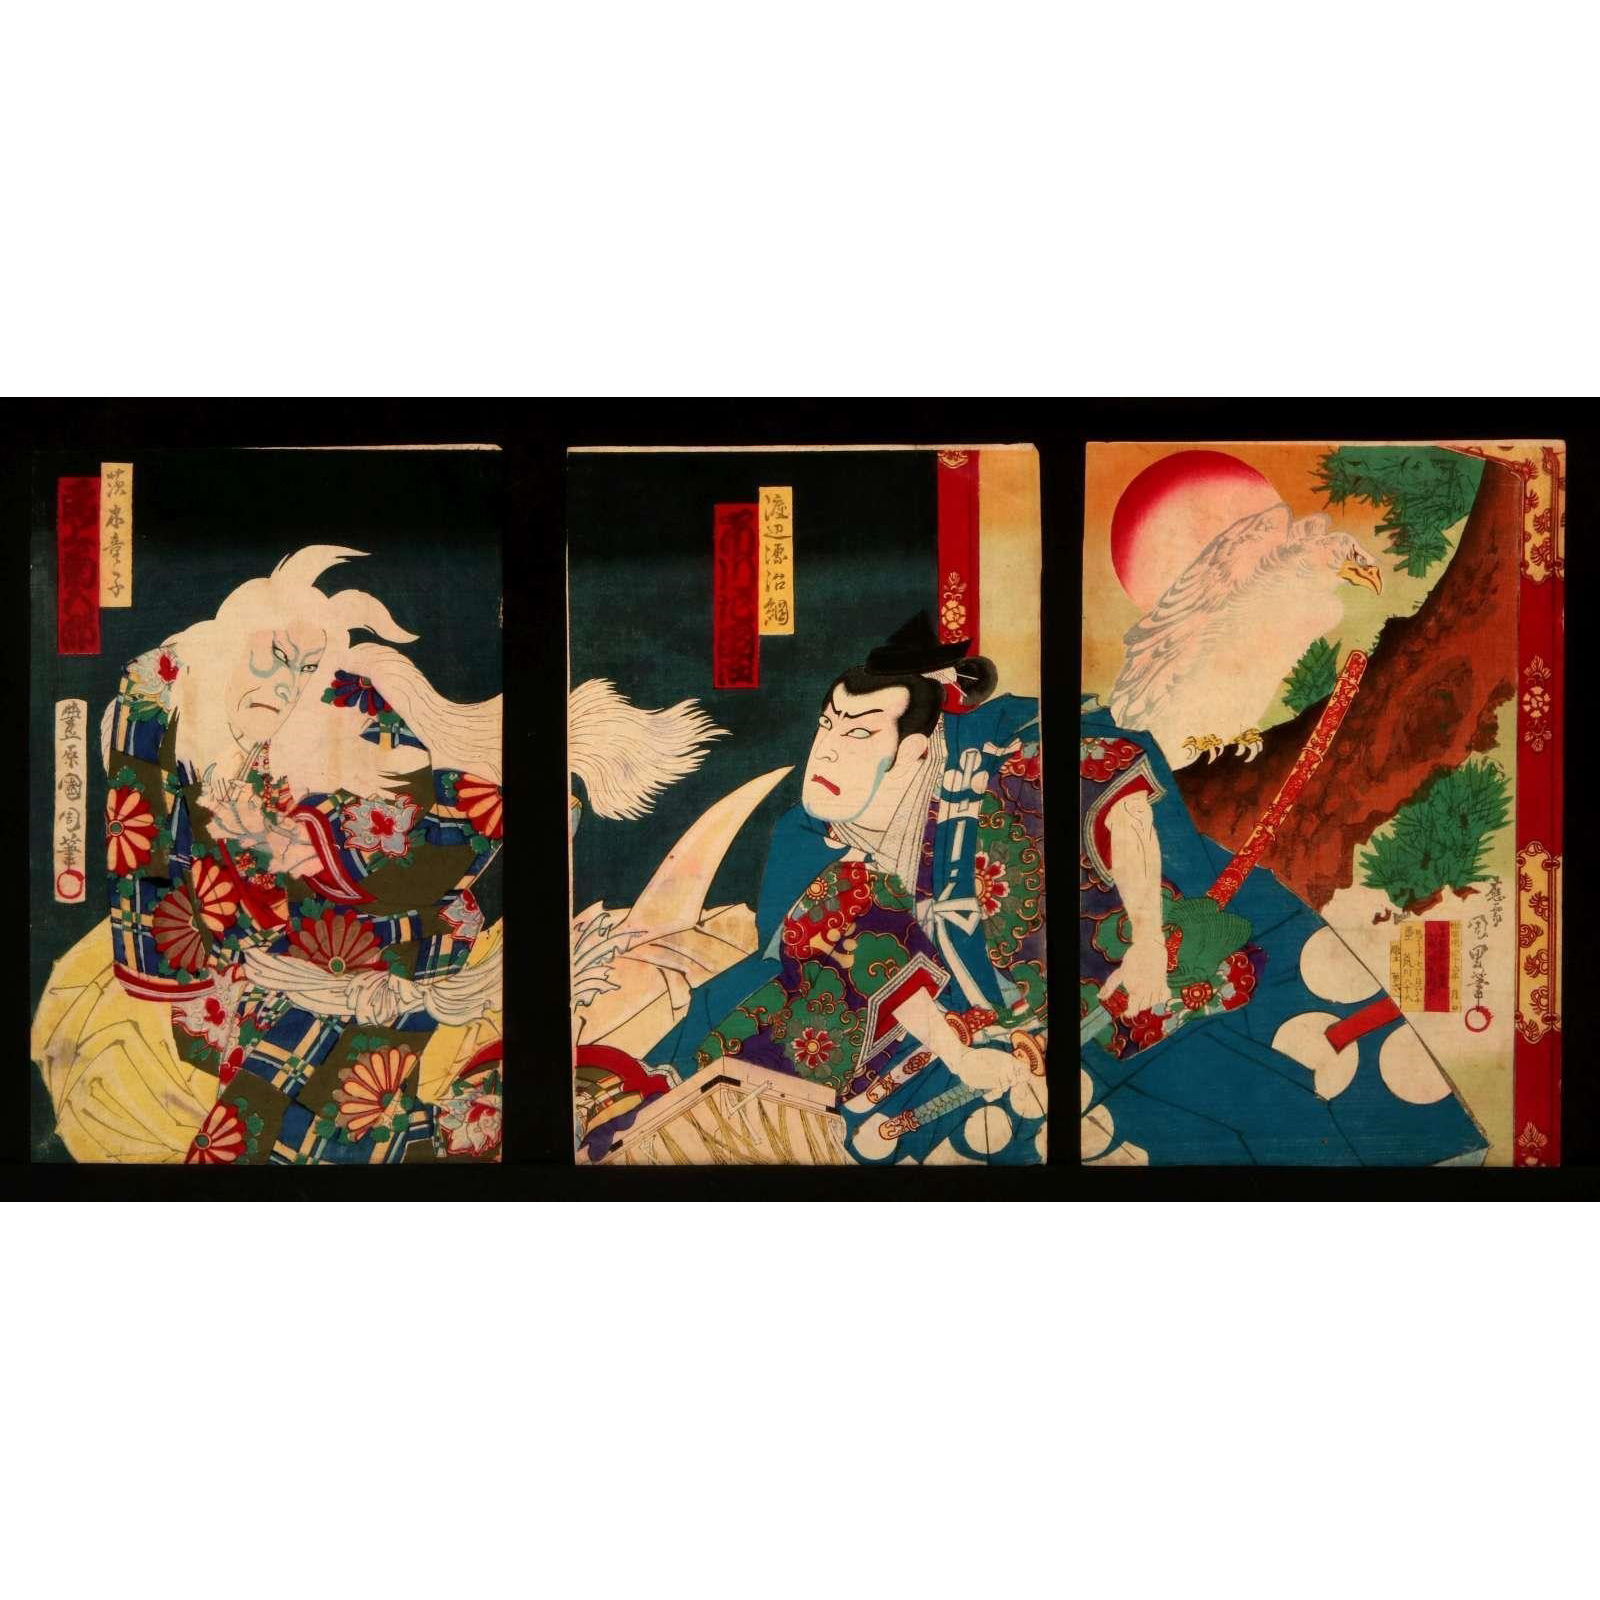 AW10-005: 19TH CENTURY JAPANESE TRIPTYCH WOODBLOCK PRINT